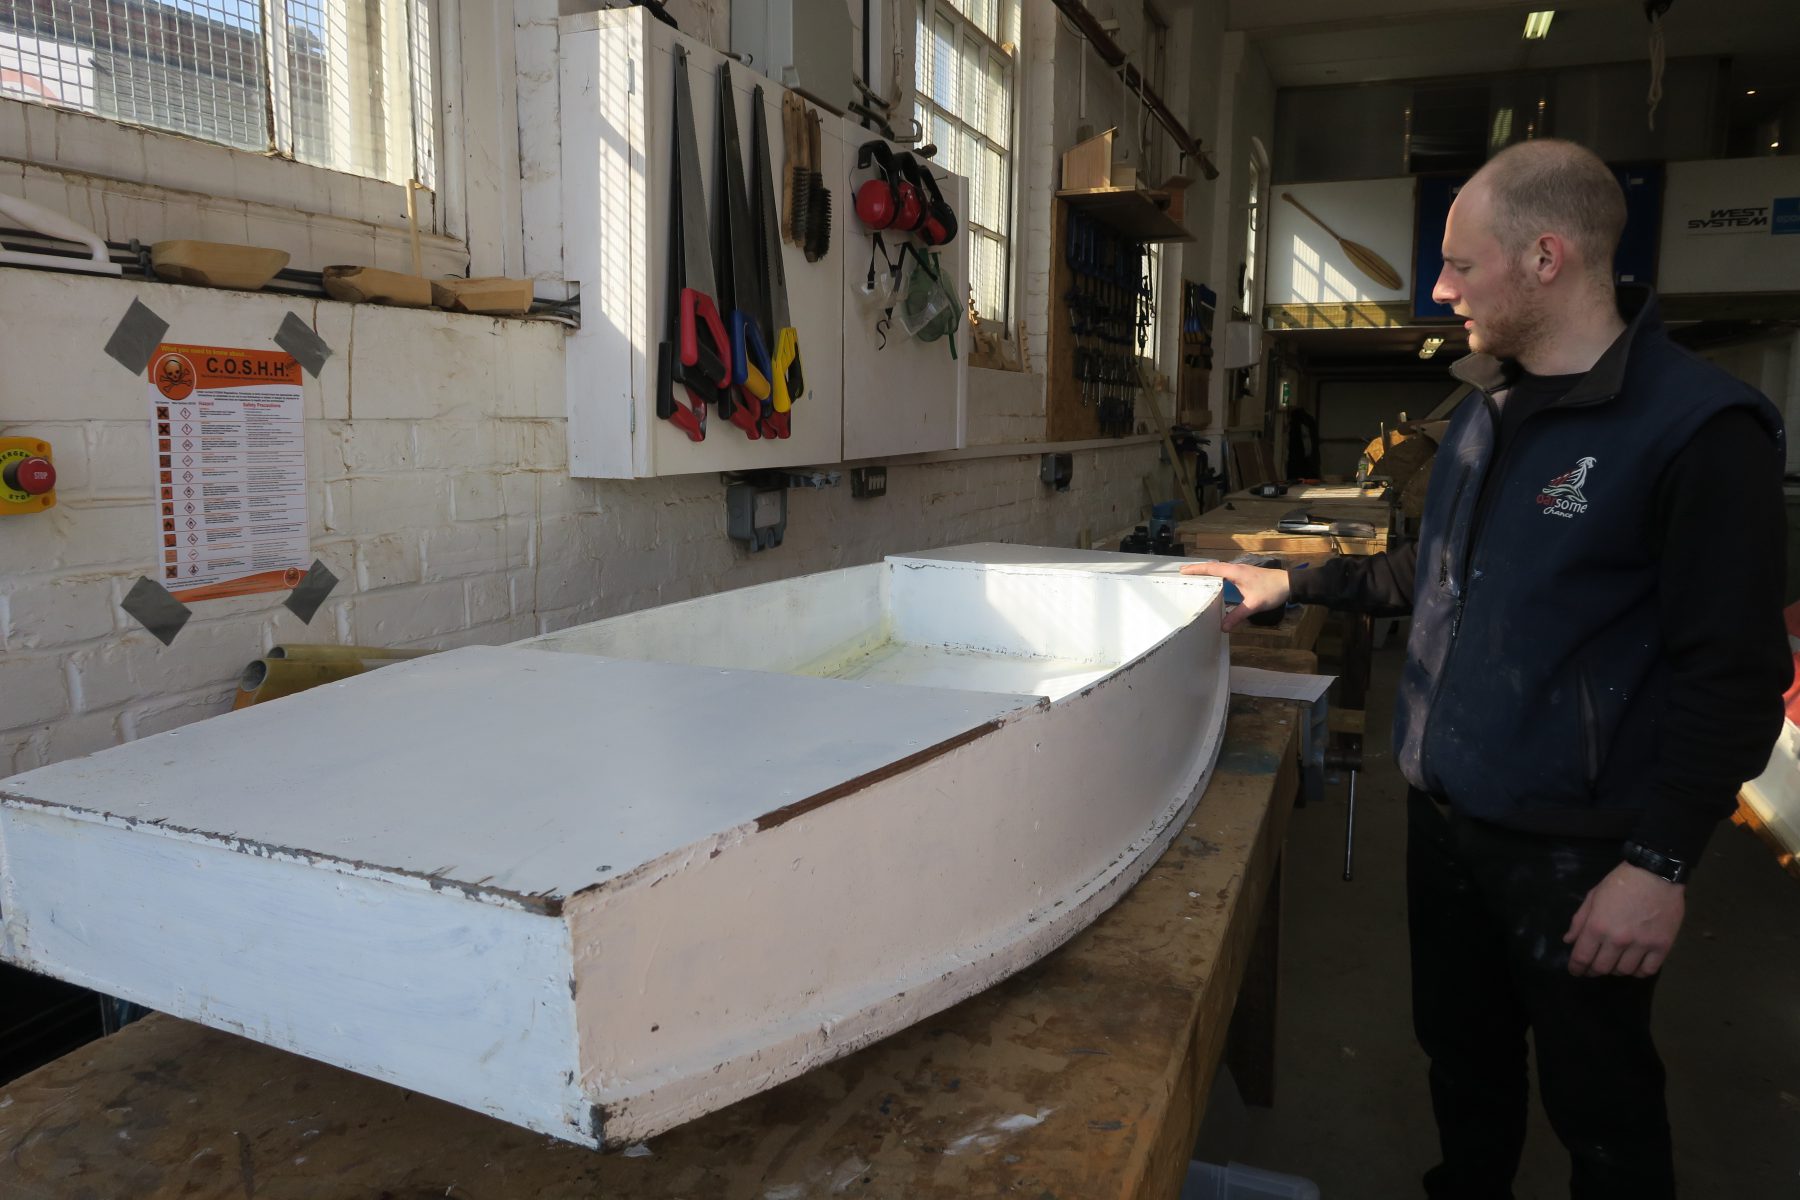 How to build a mouse boat with epoxy and Oarsome Chance